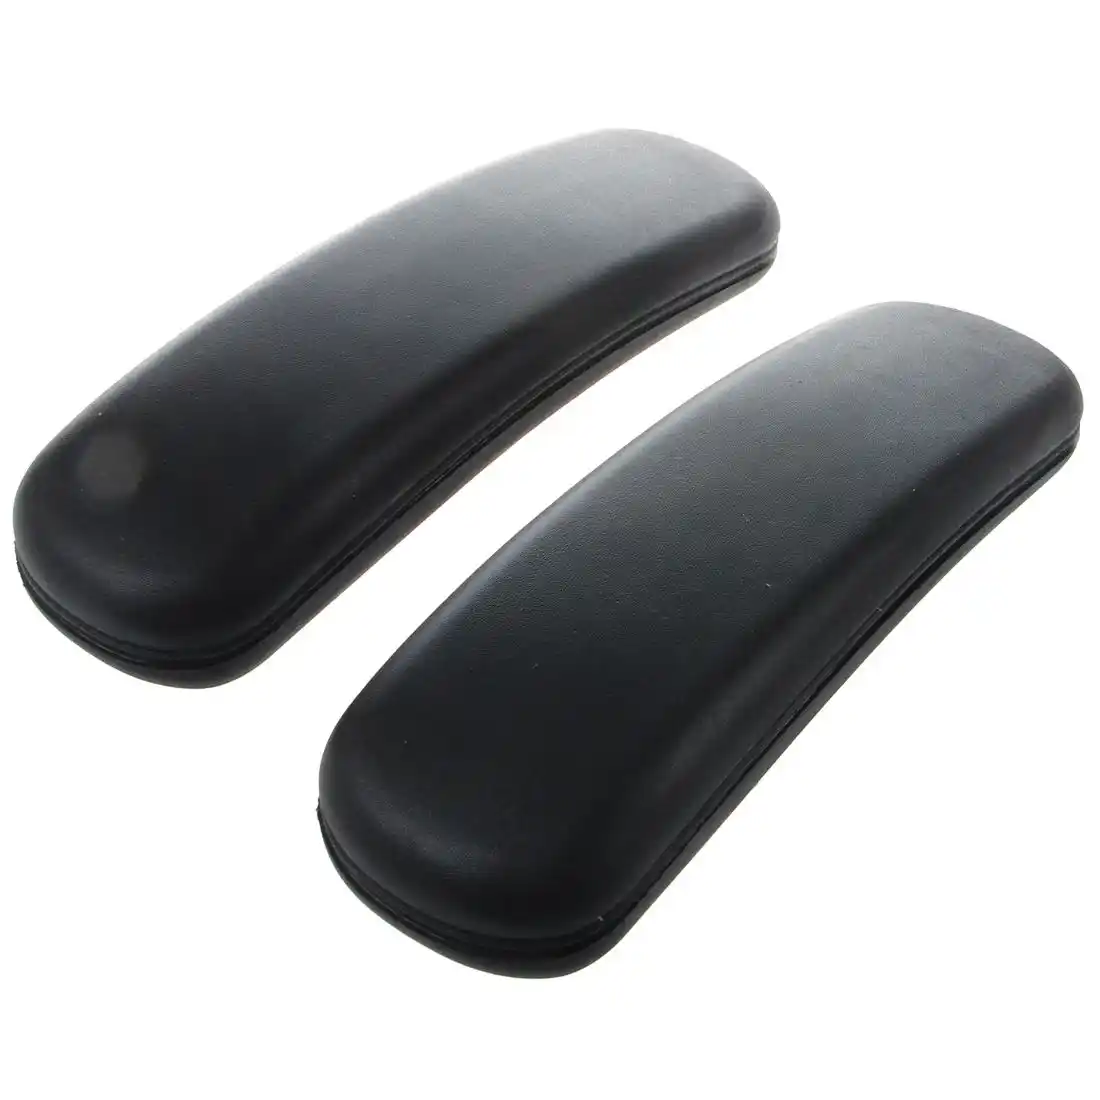 Office Chair Parts Arm Pad Armrest Replacement 9 75 X 3 Black Chair Armrests Chair Armrest Padarmrest Pad Aliexpress